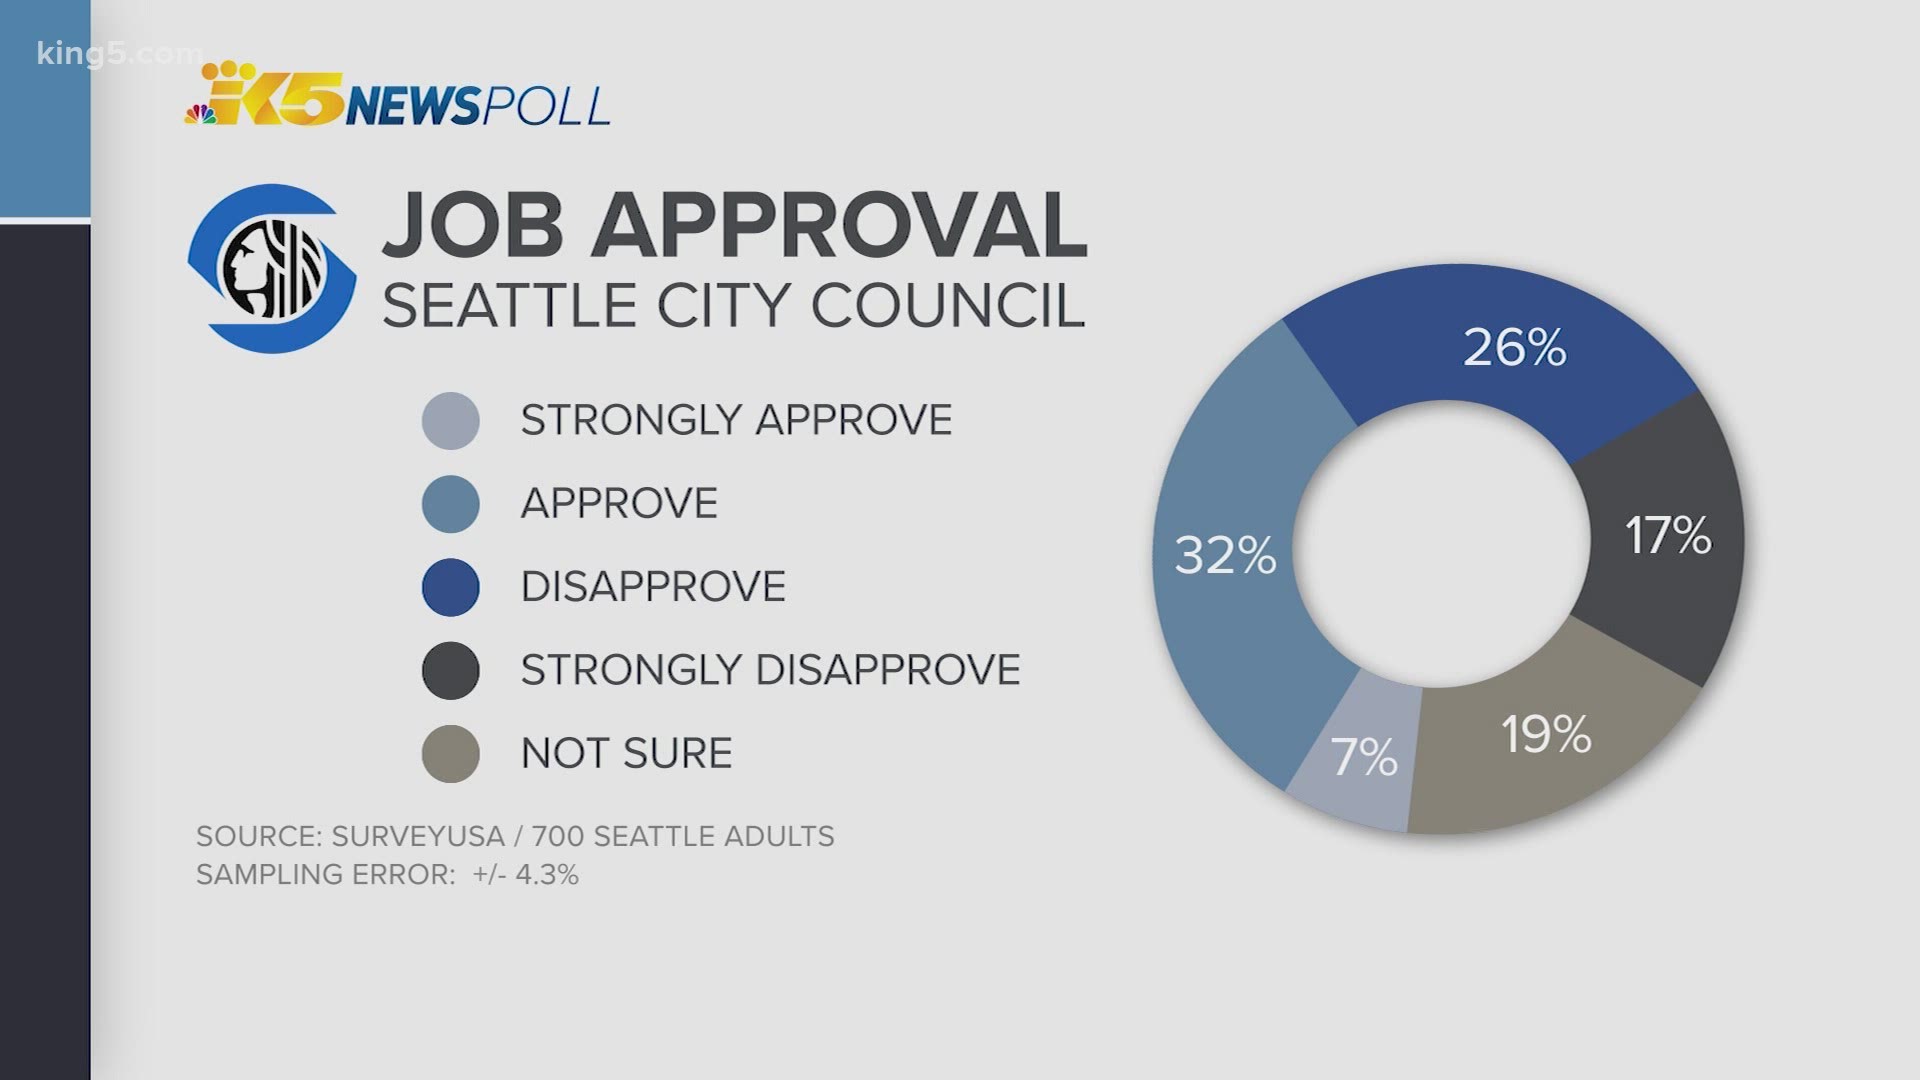 Of the 700 Seattle adults polled, 32% say they approve of the job Seattle City Council is doing, and 7% say they strongly approve.